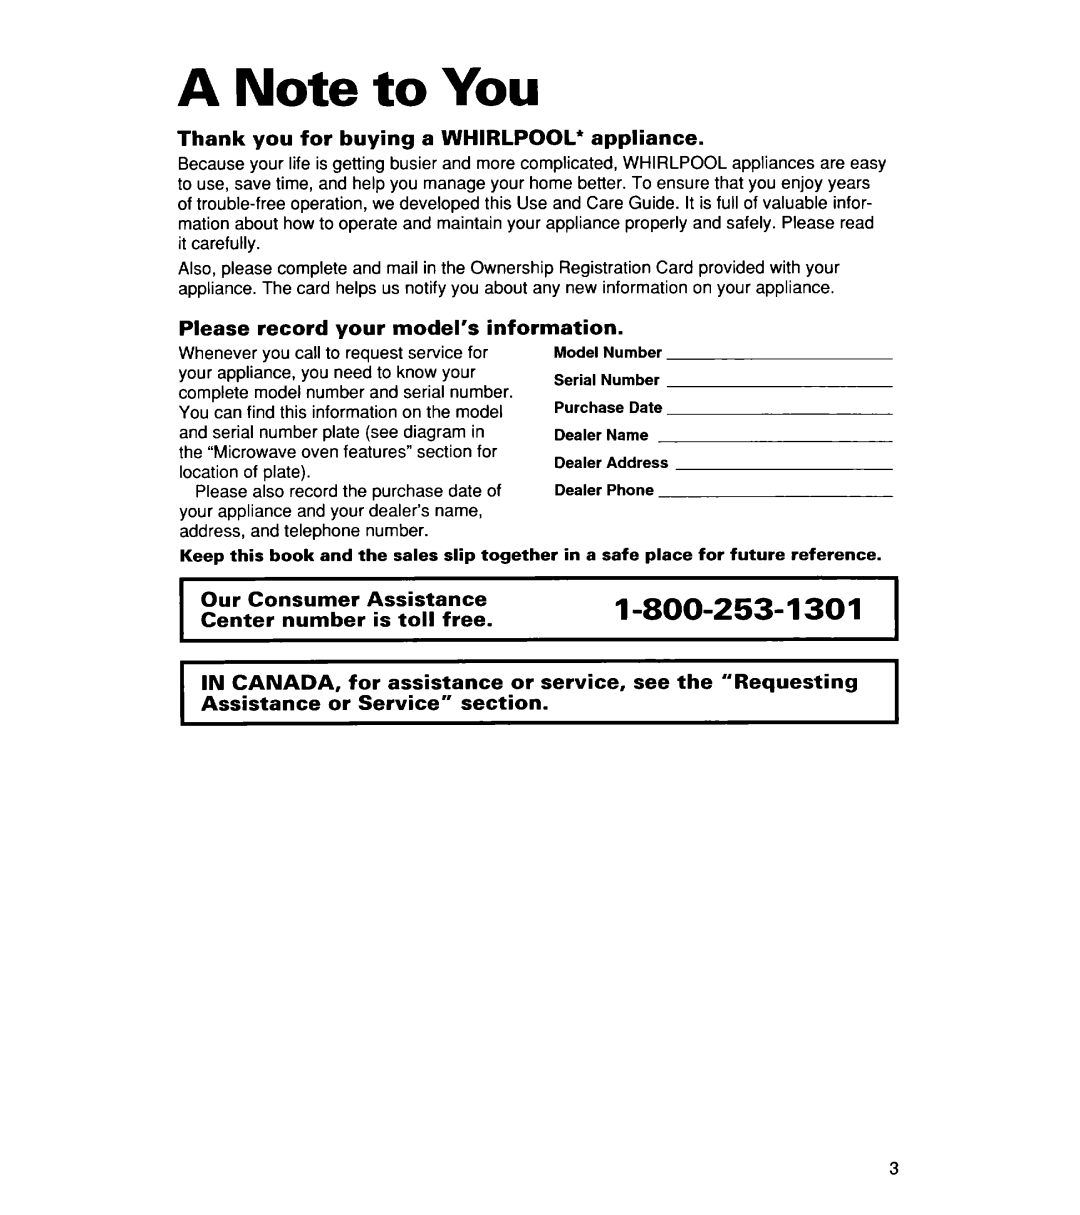 Whirlpool YMT9114SF, MT8118XE, MT8116XE, YMT8116SE, YMT8078SE, YMT8076SE, YMT8118SE installation instructions A Note to You 